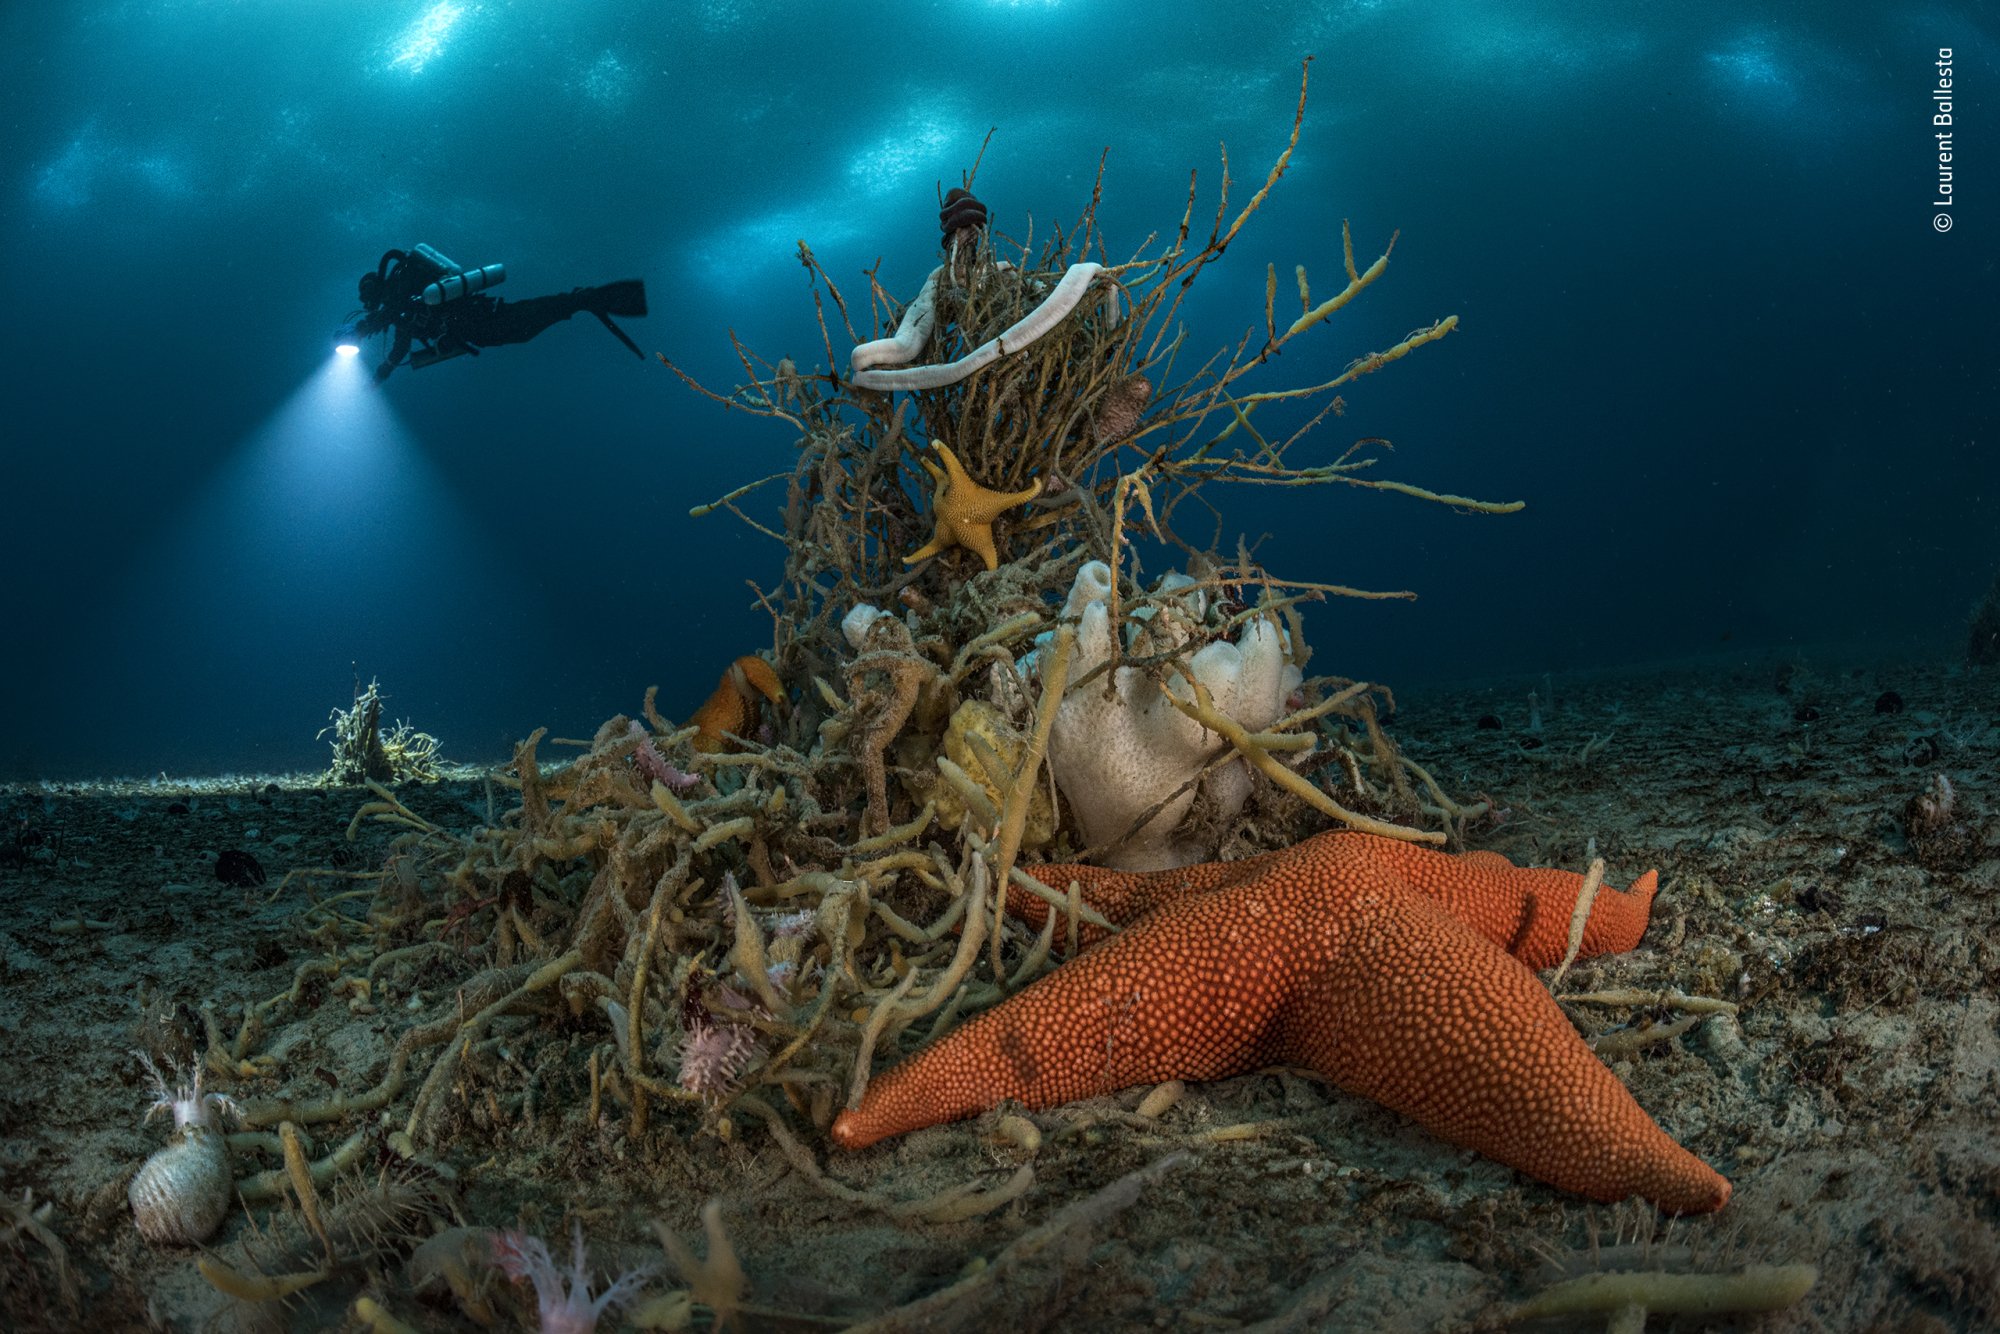 The seabed off Adelie Land, featuring a tree-shaped sponge, giant ribbon worms and a sea star.